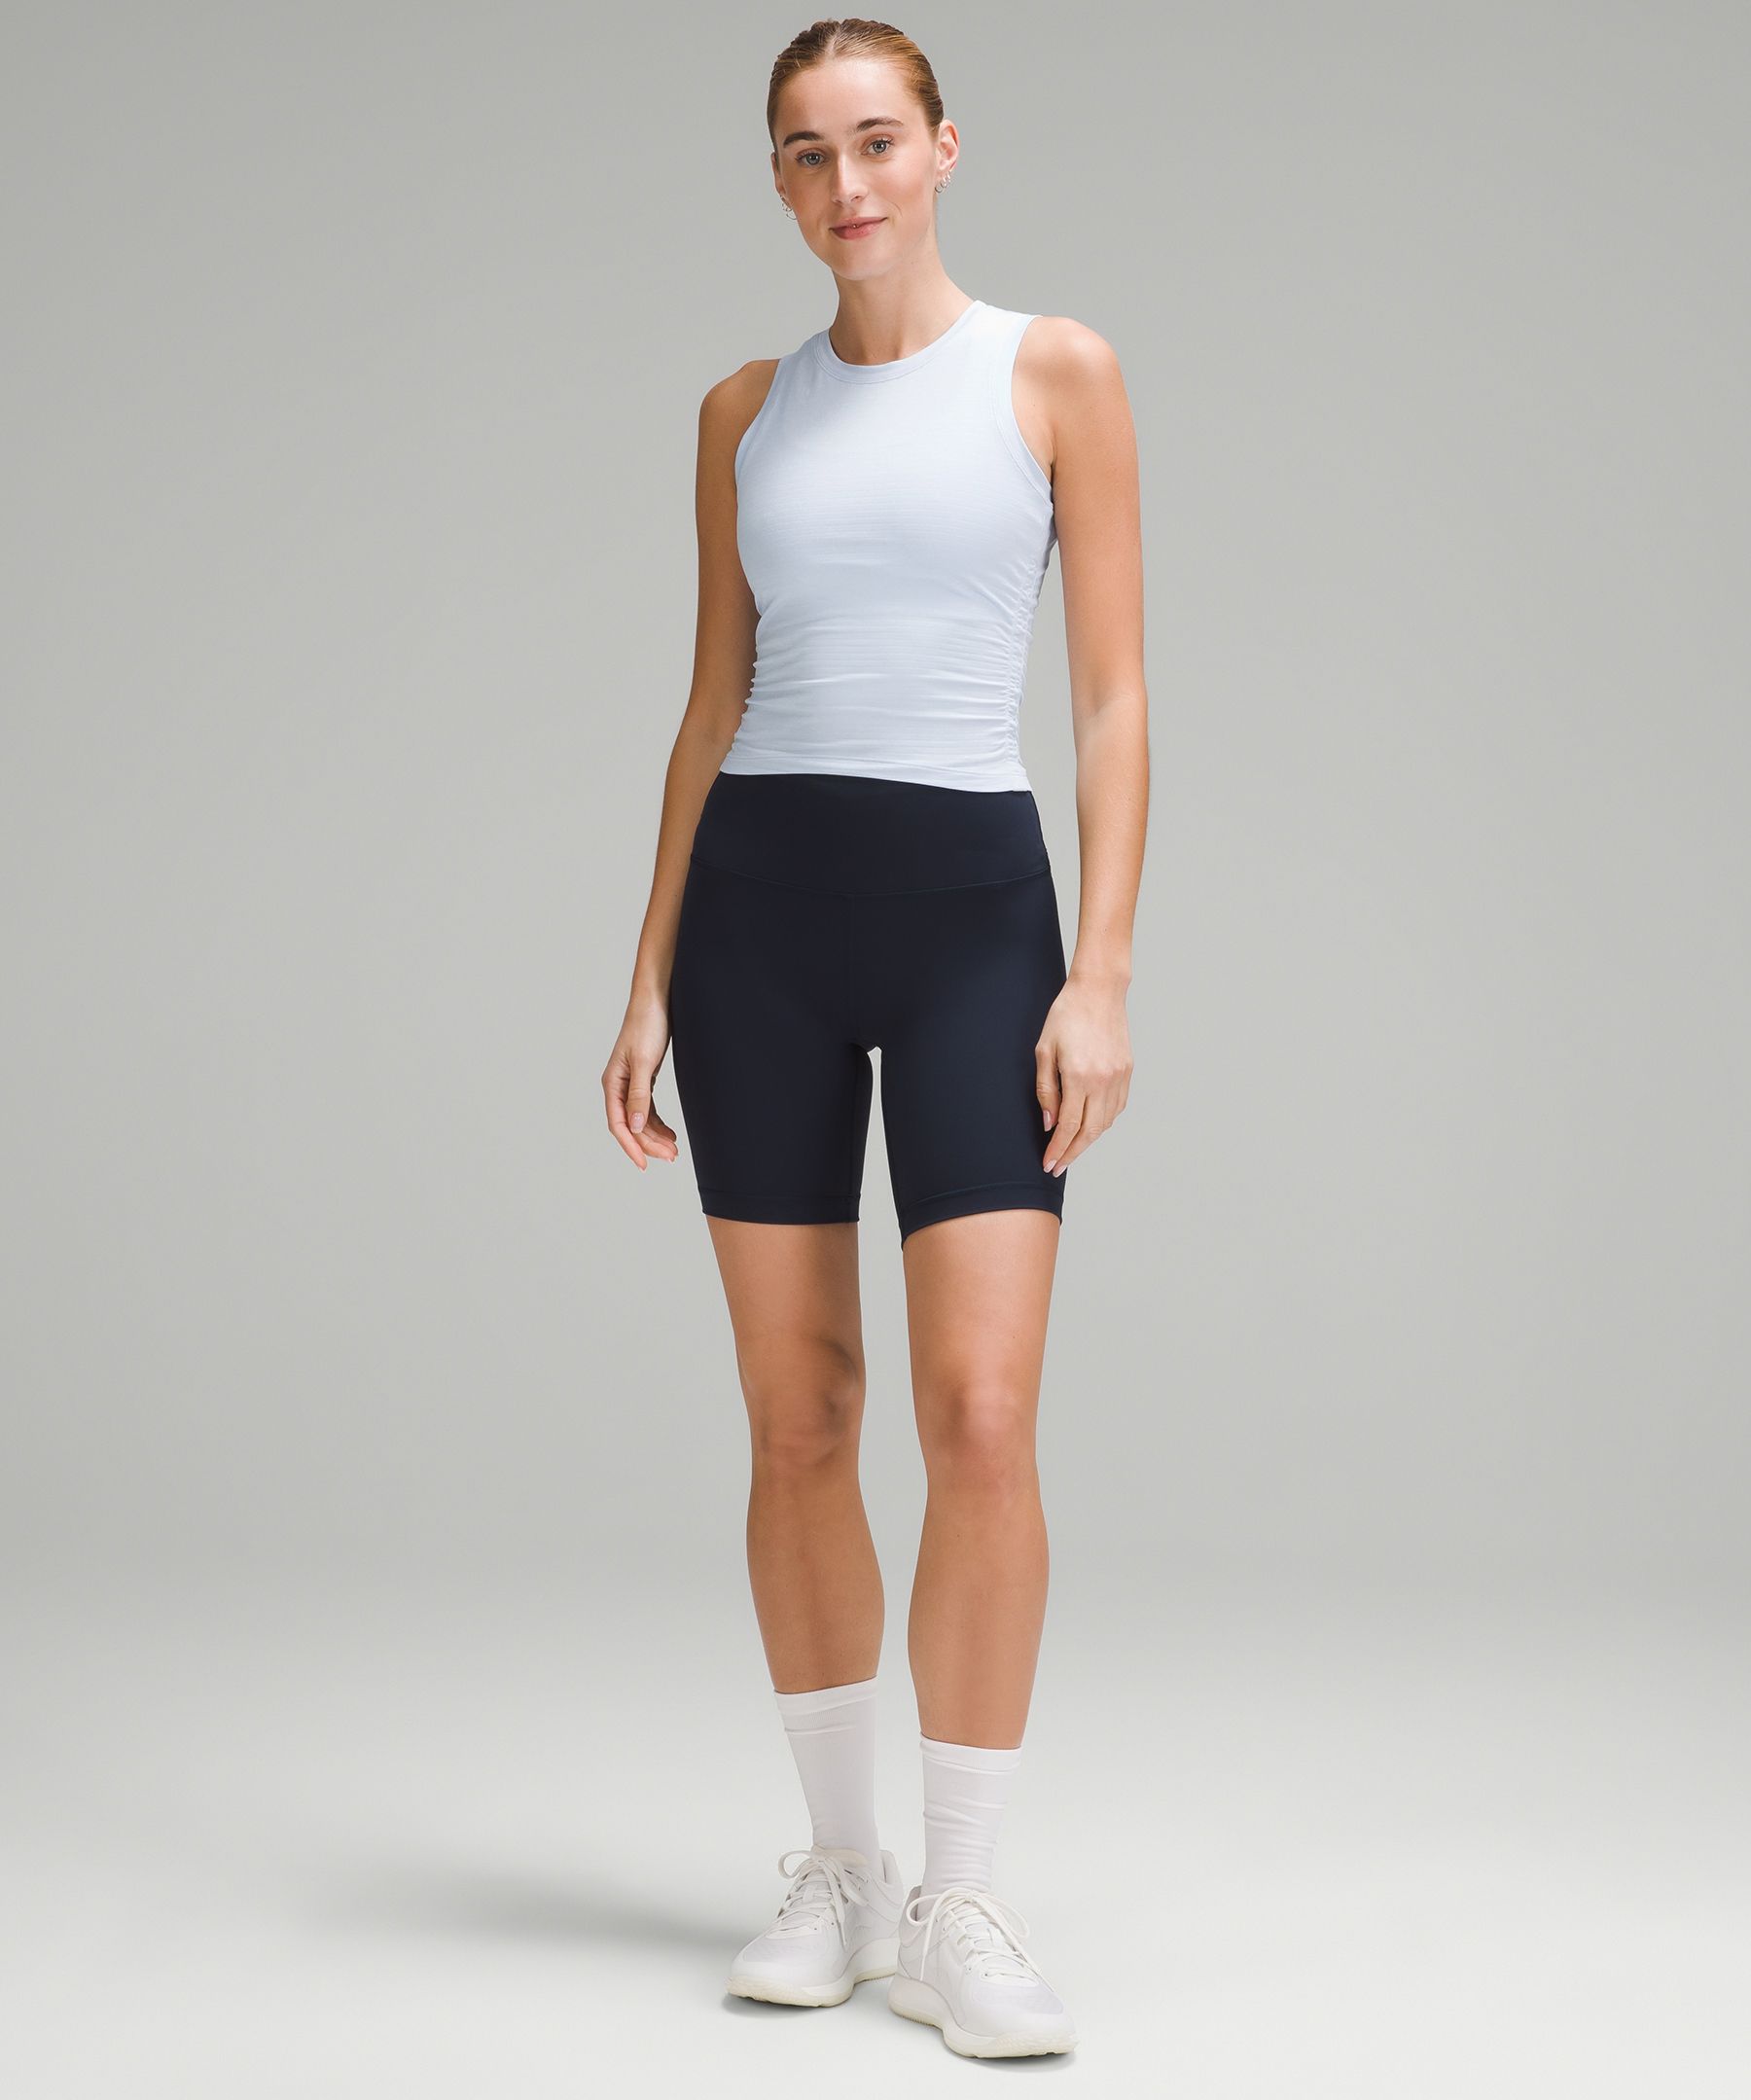 Lululemon Athletica Color Block Gray Active Tank Size 8 - 53% off